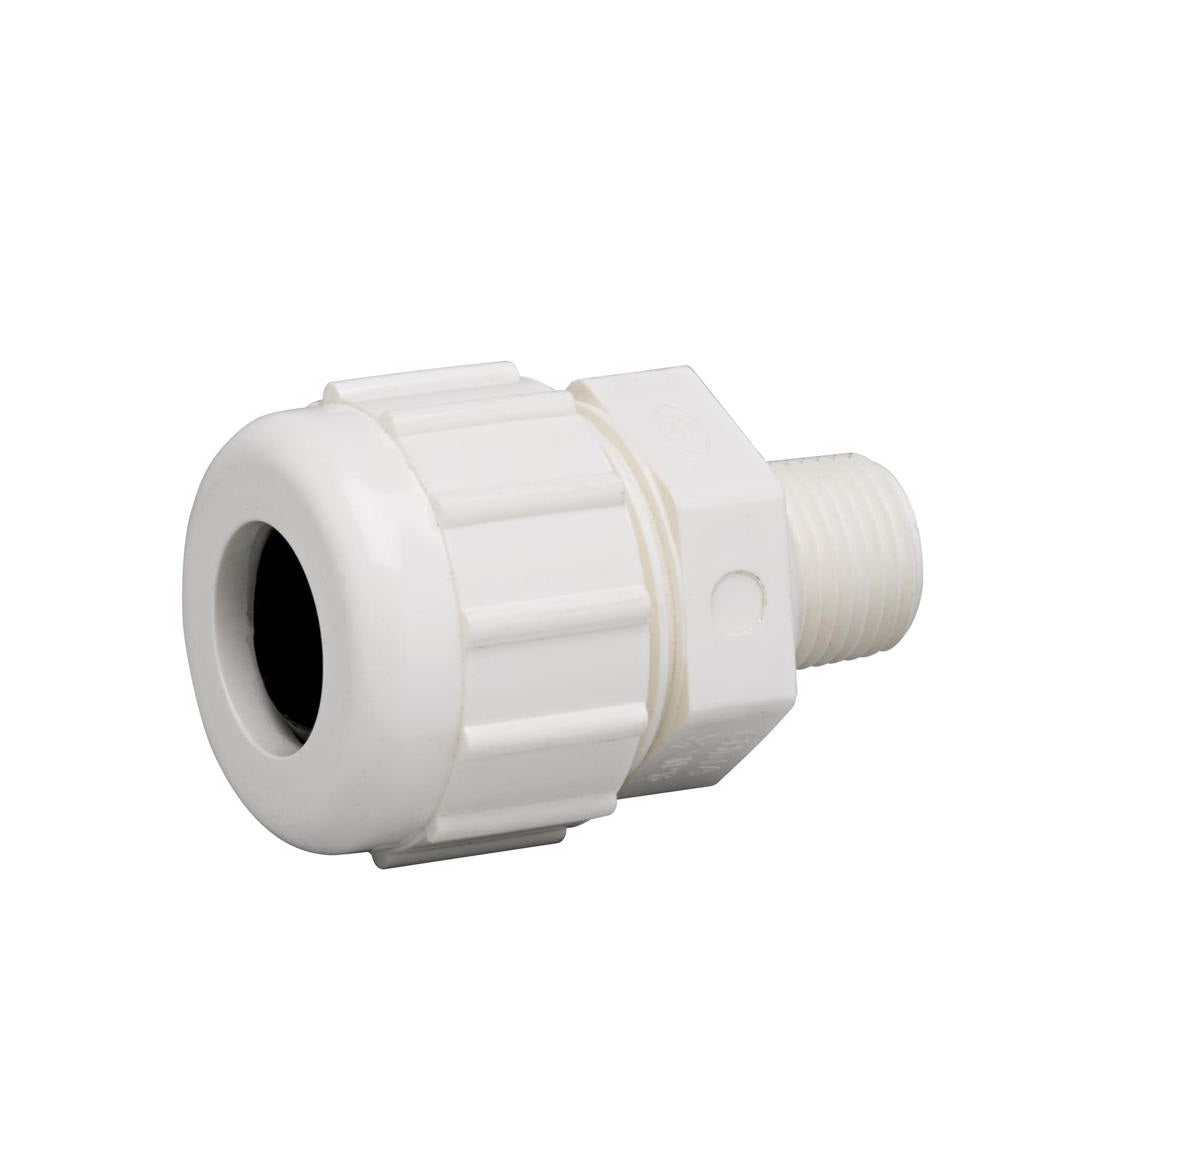 King Brothers CPA-2000 Sch 40 Pvc Compression Adapter, 2"